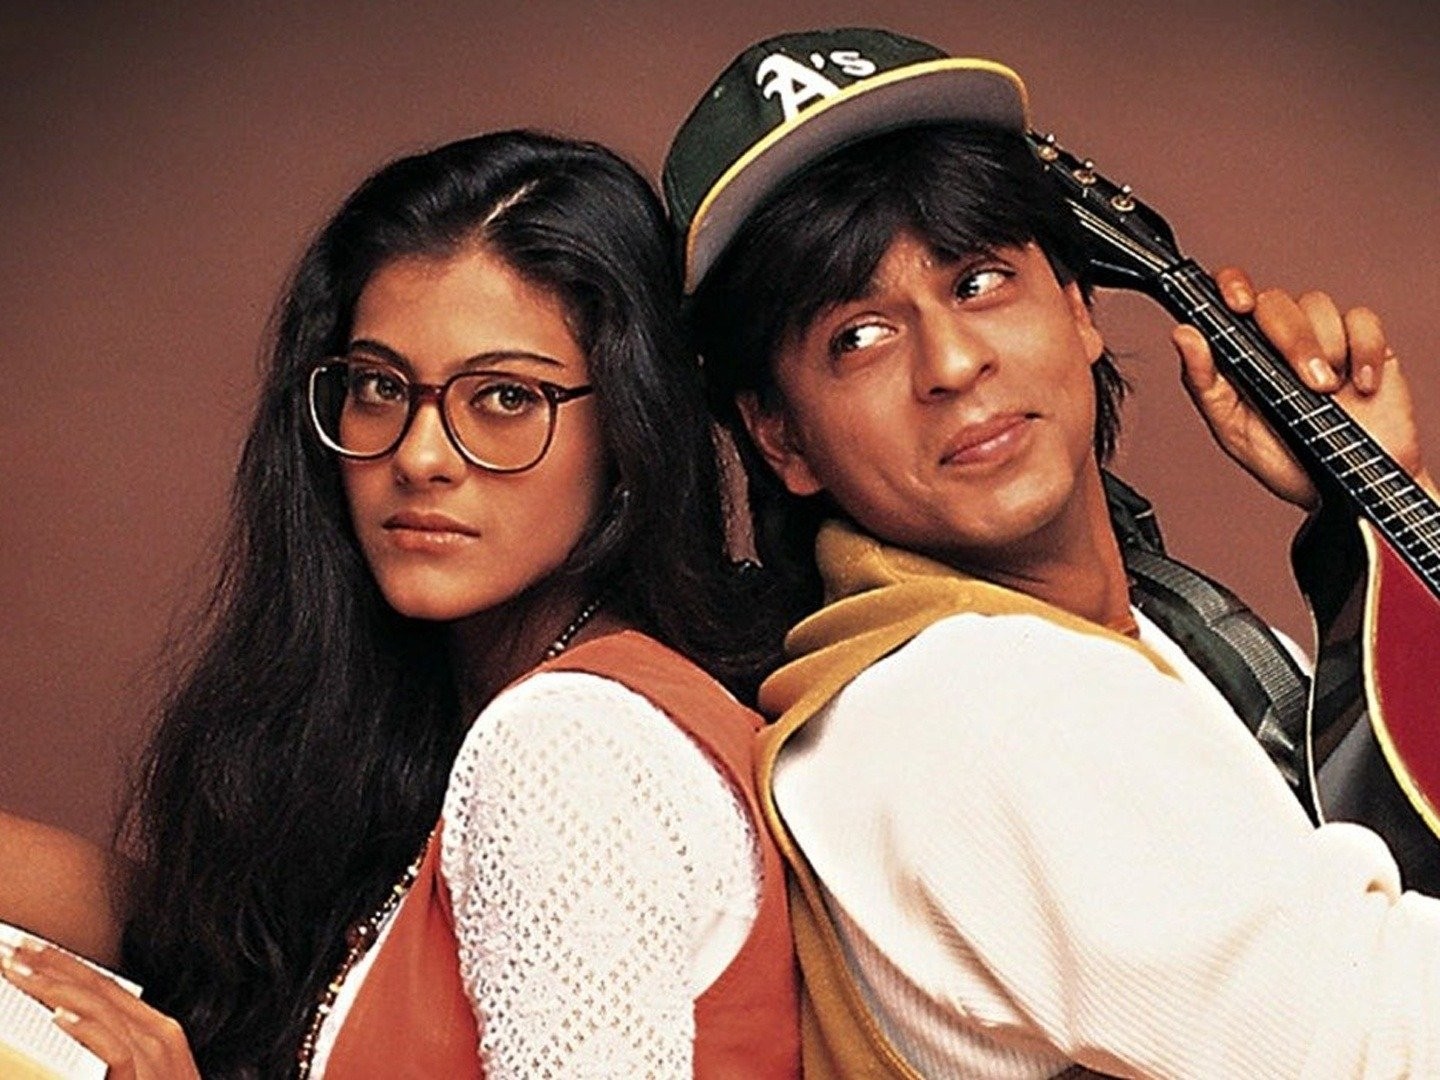 Dilwale Dulhania Le Jayenge (1995) - Valentine's Day: 5 best romantic  movies to watch with your partner | The Economic Times